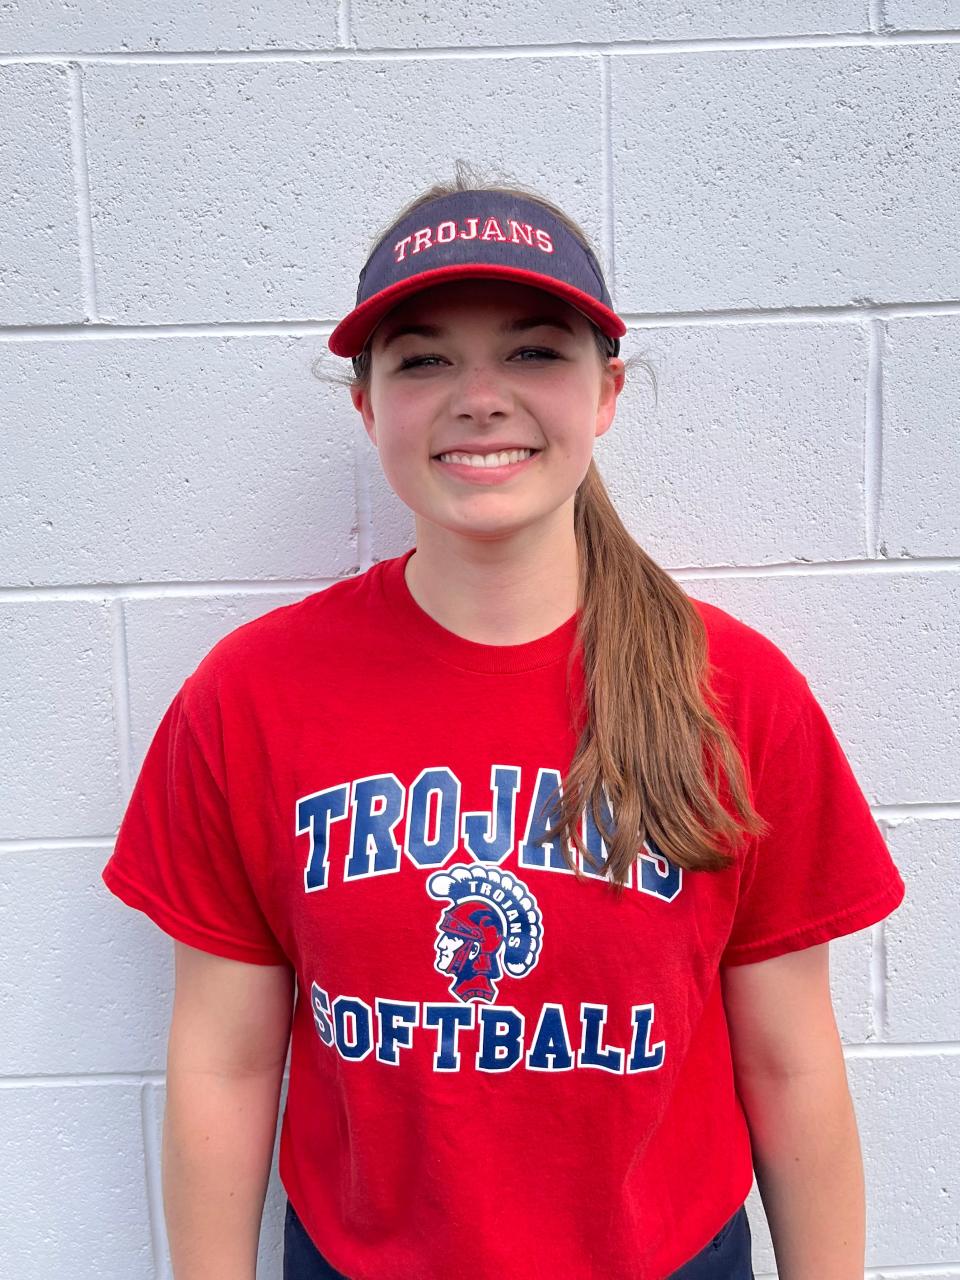 Bridgewater-Raynham’s Taylor Reid is the Taunton Daily Gazette Player of the Week for April 18-23.